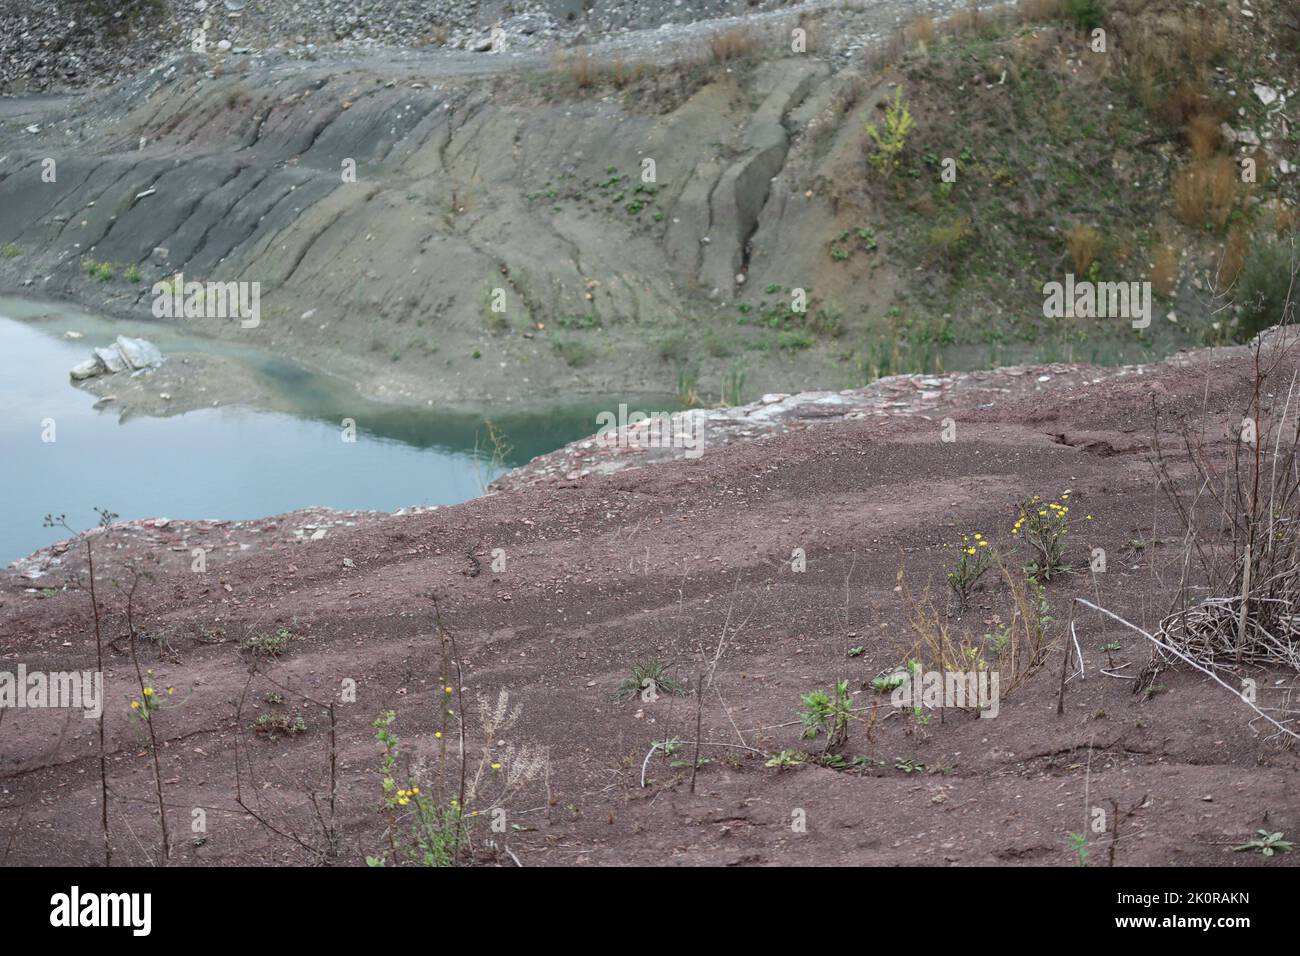 unreal Landscape due to abandoned Quarry Stock Photo